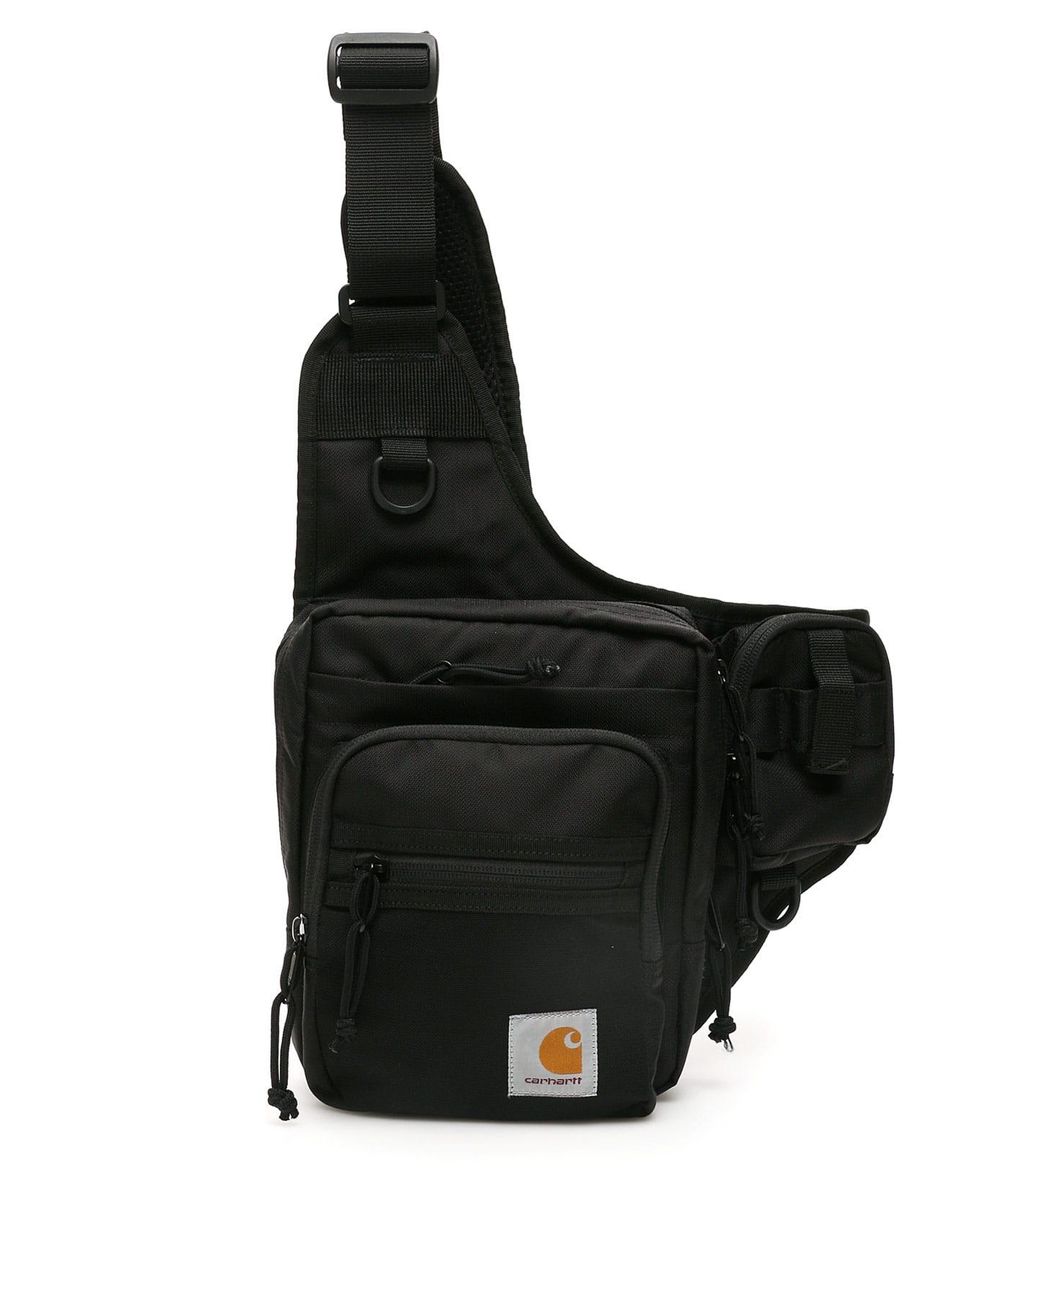 Carhartt Delta Strap Bag - The Elevated Style